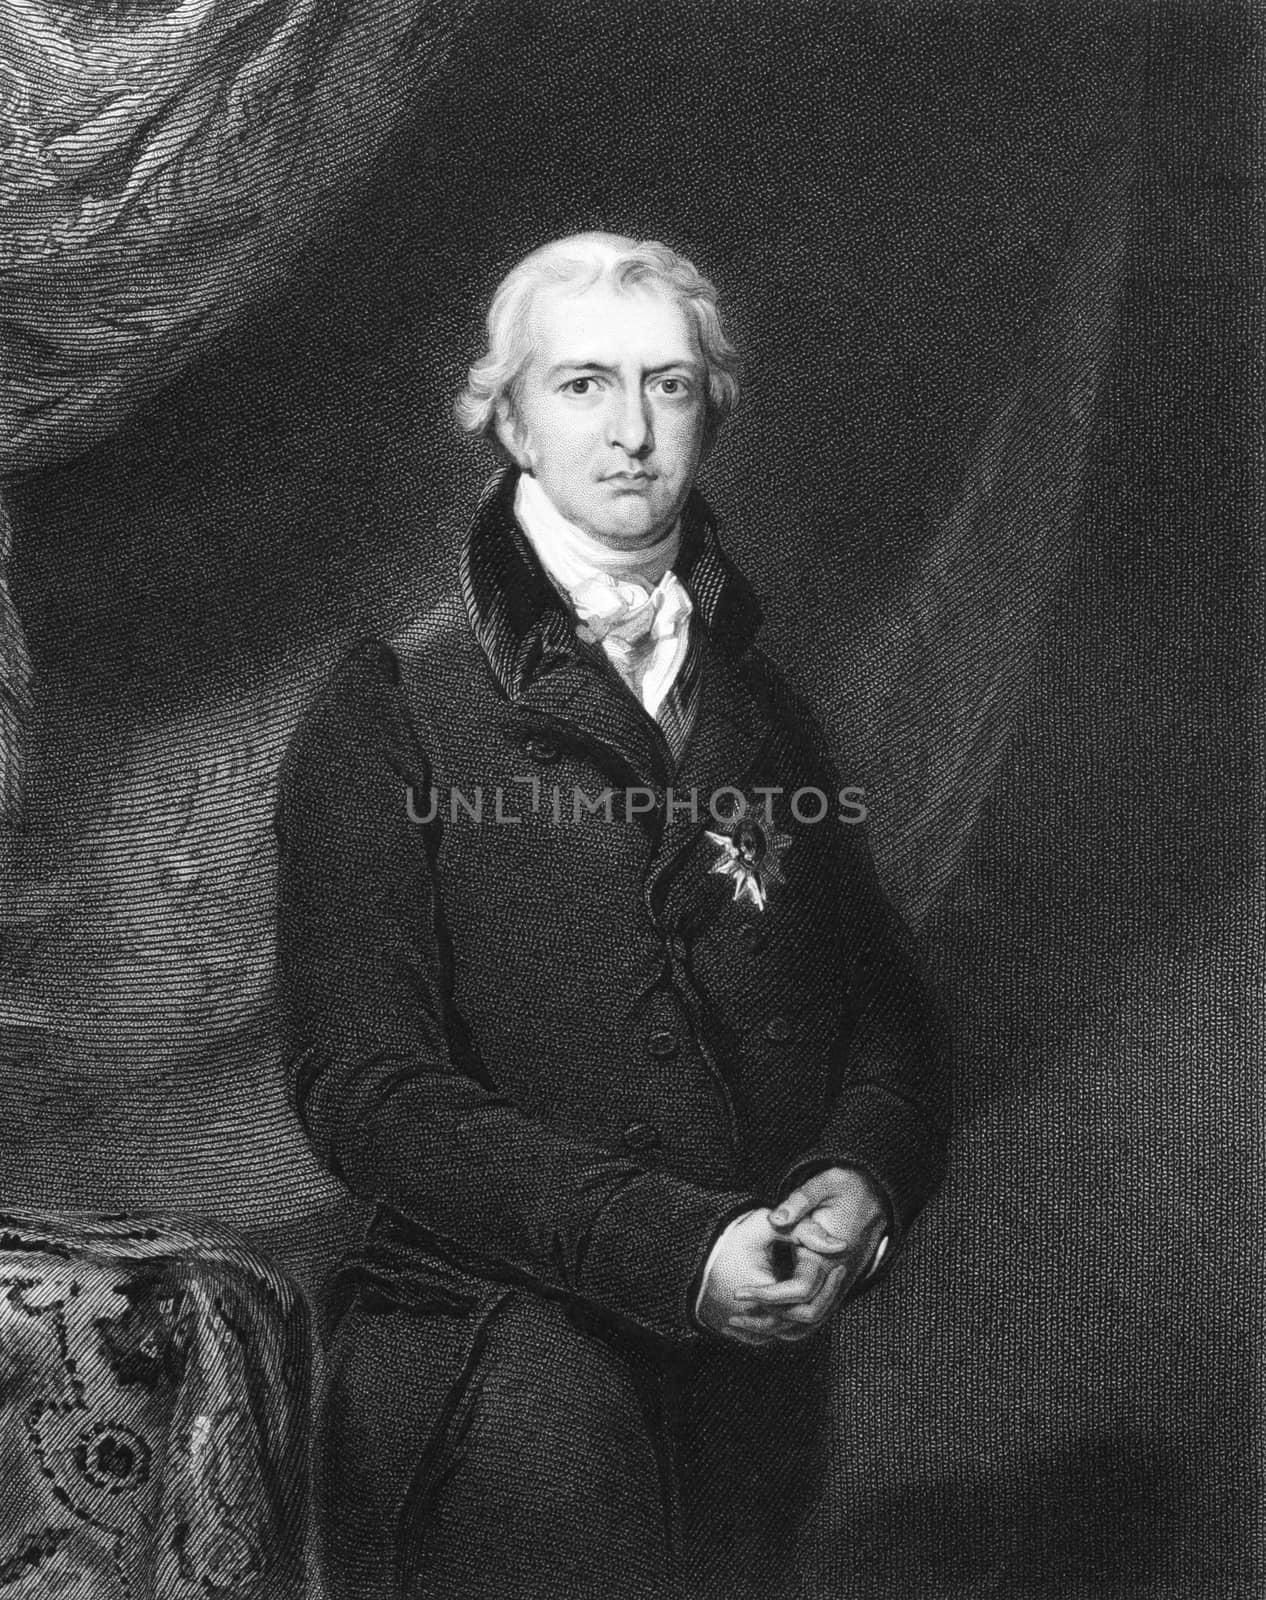 Robert Jenkinson, 2nd Earl of Liverpool (1770-1828) on engraving from 1834. British politician and prime minister during 1812-1827. Engraved by H.Robinson and published in ''Portraits of Illustrious Personages of Great Britain'',UK,1834.